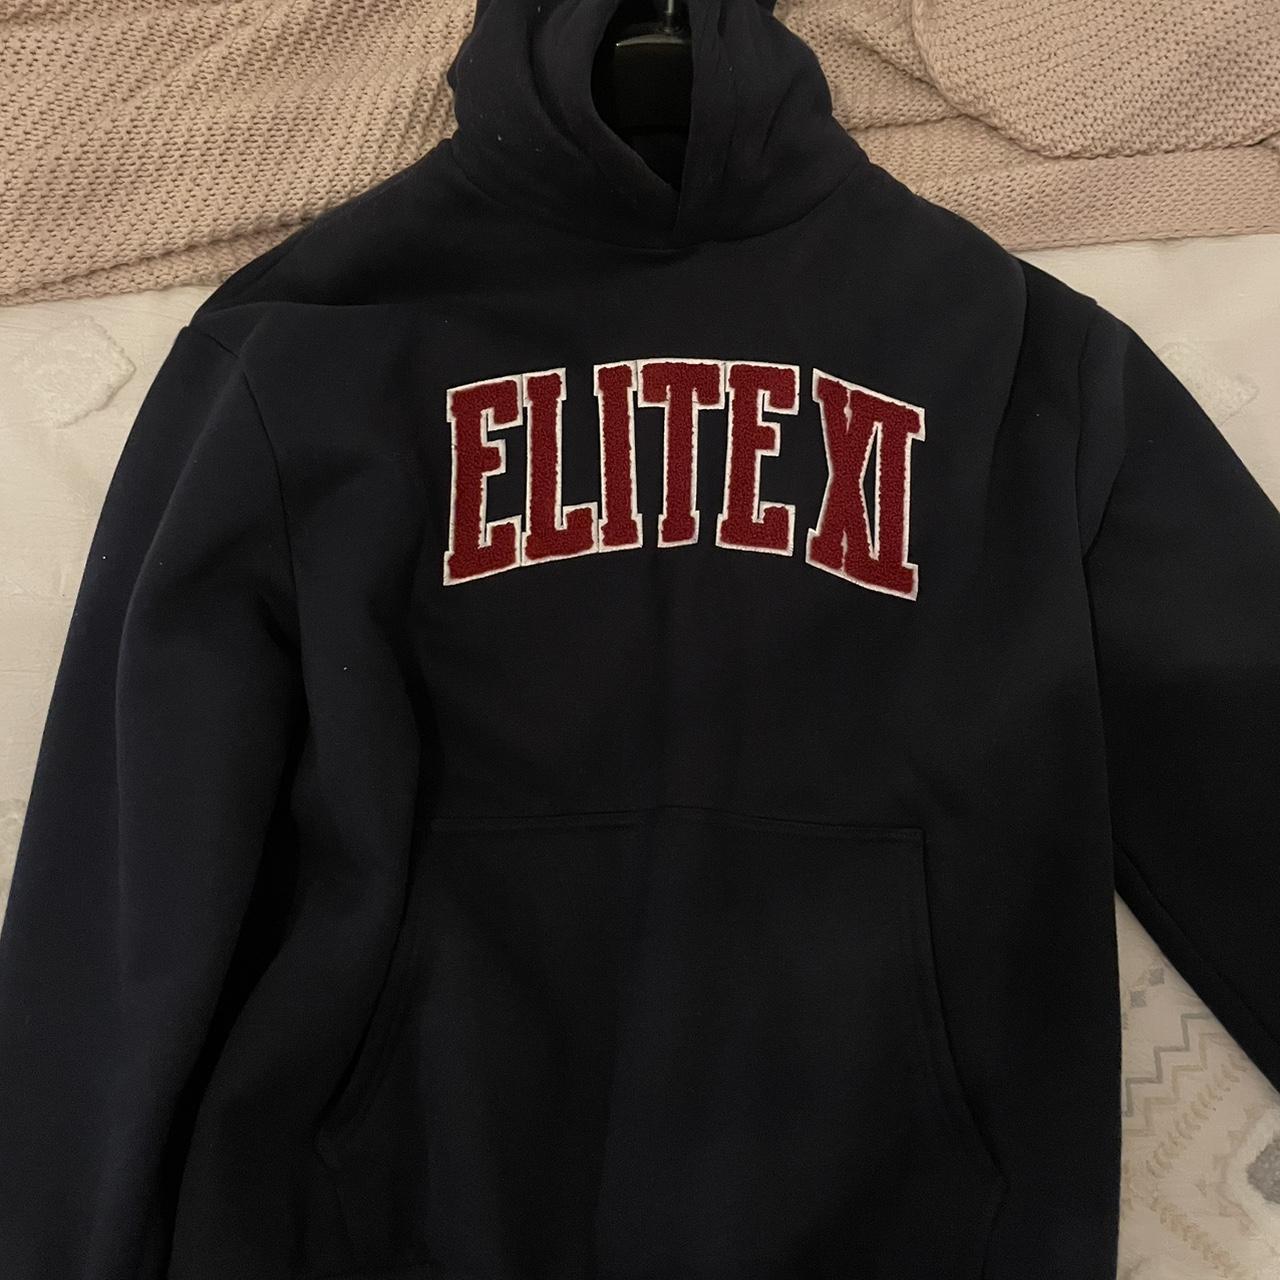 Elite Eleven hoodie in blue and red - only worn a... - Depop